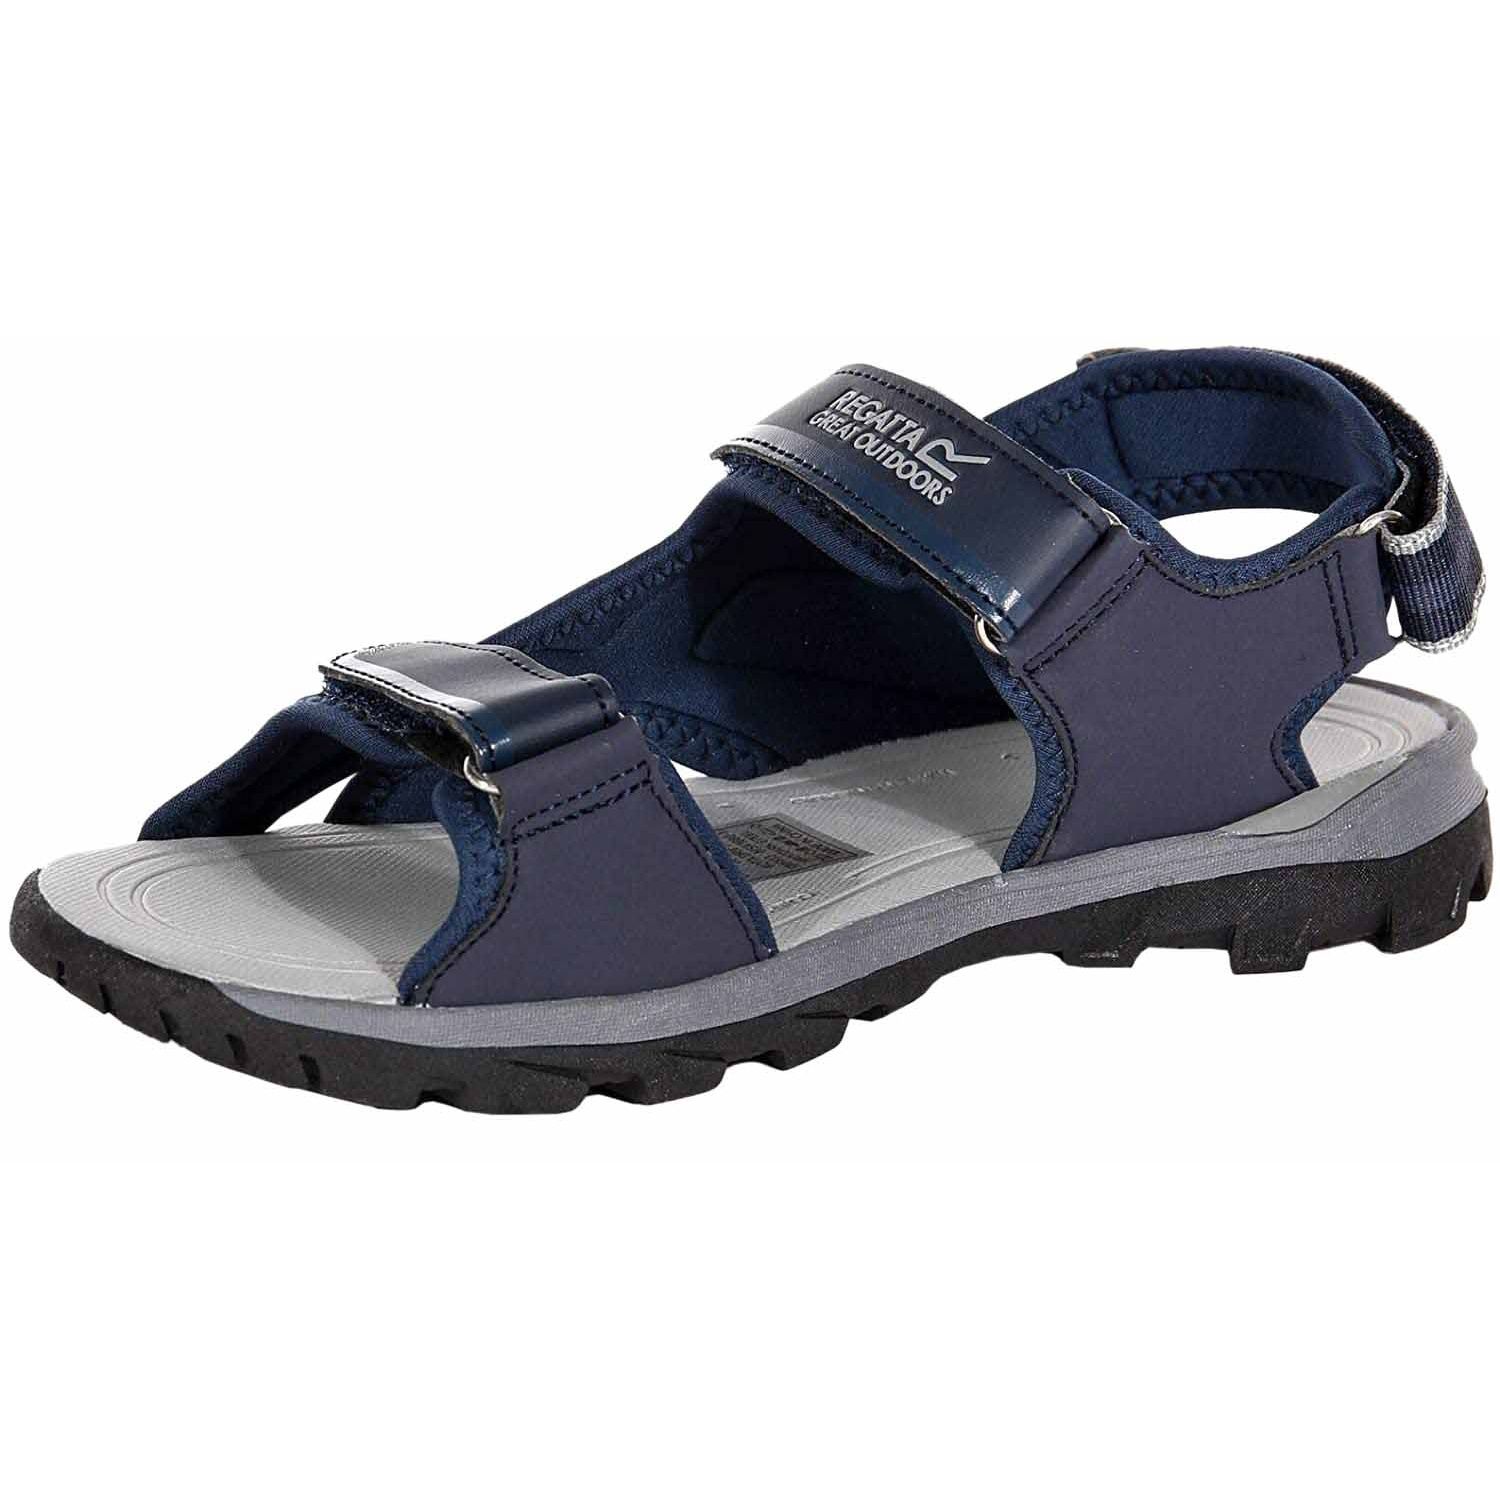 85% Polyurathane, 15% Polyester. Lining: Spandex. Sole: TPR. Ventilated mesh upper for breathability. Spandex lining for extra comfort and a positive fit. Adjustable hook and loop straps with webbing trim. Moulded instep stability arm. Water friendly comfort EVA footbed.